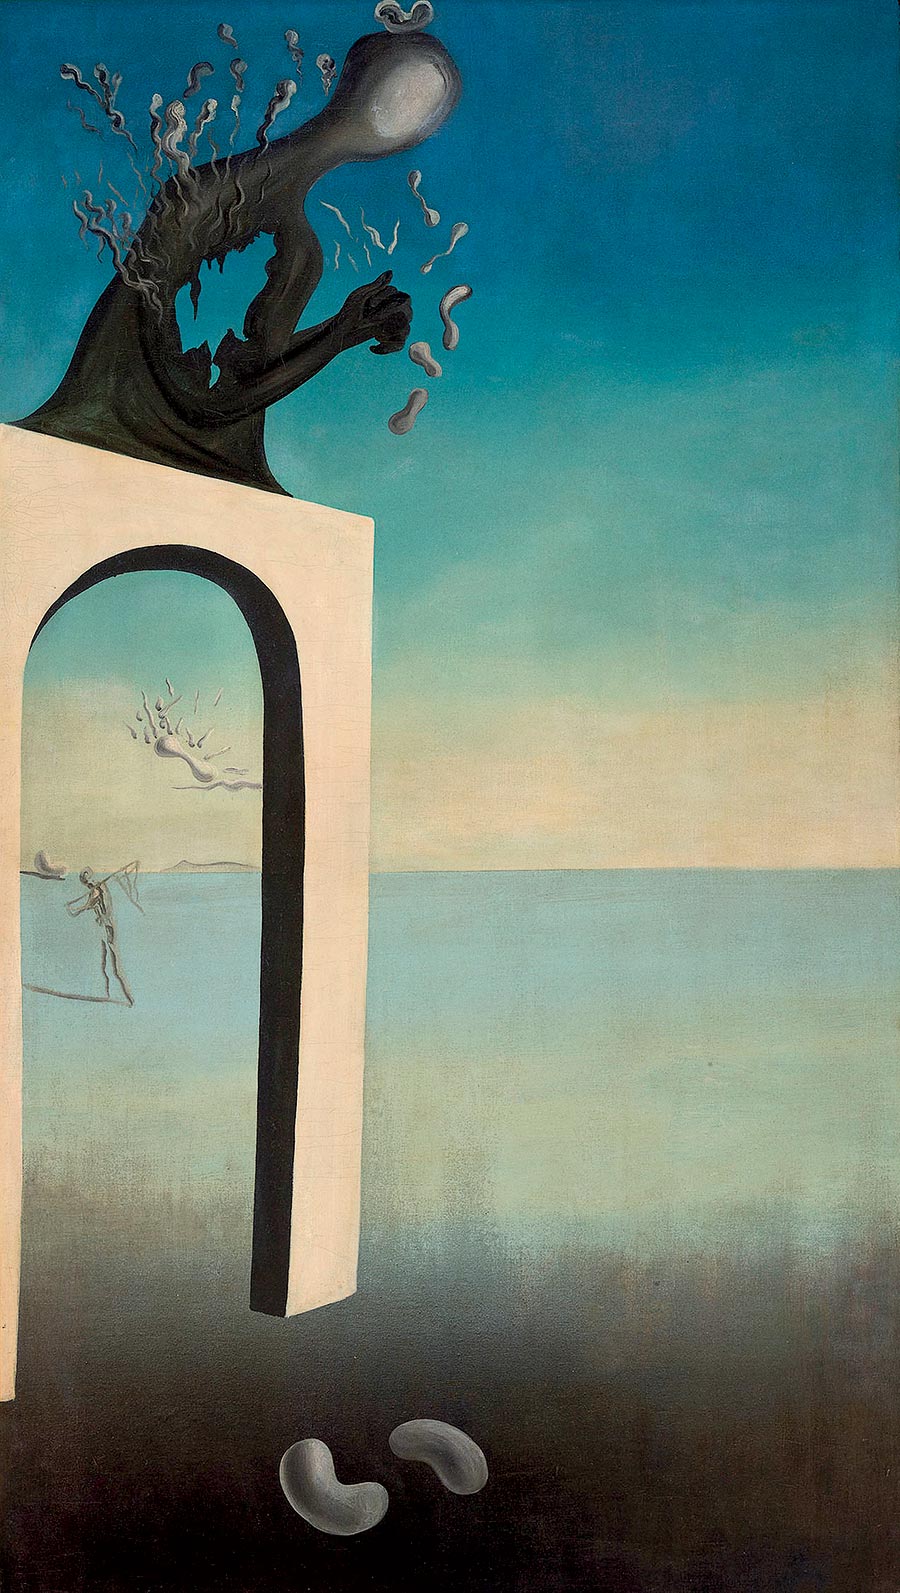 ‘Visions of Eternity’ by Salvador Dalí